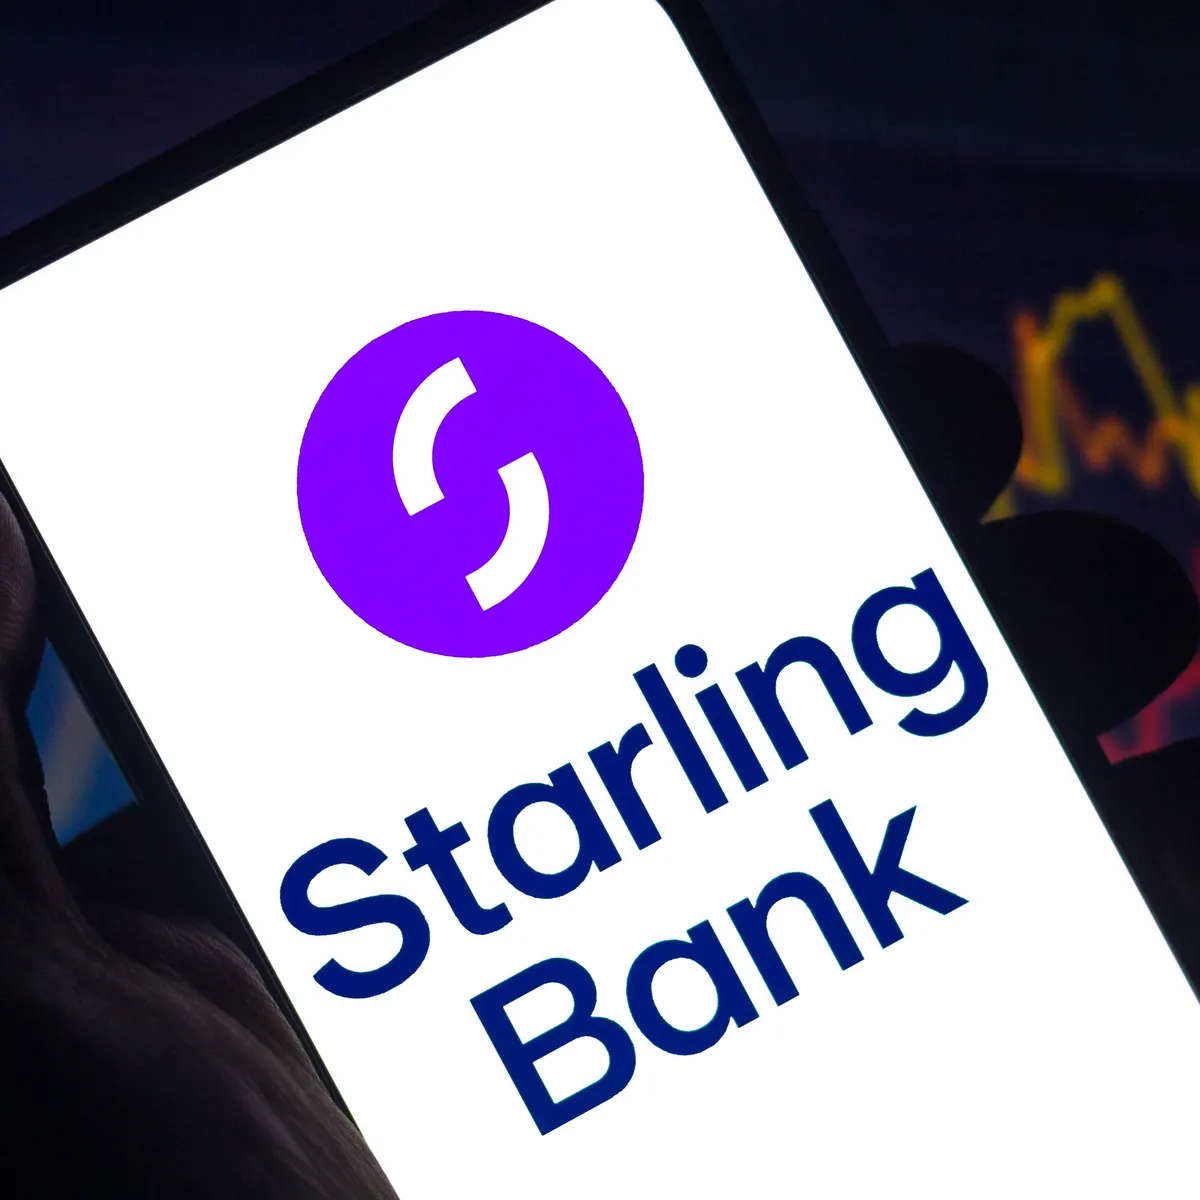 EXCLUSIVE Starling Bank CEO accused of presiding over a brutal and arbitrary exercise of power in restricting bank business customer accounts under review.